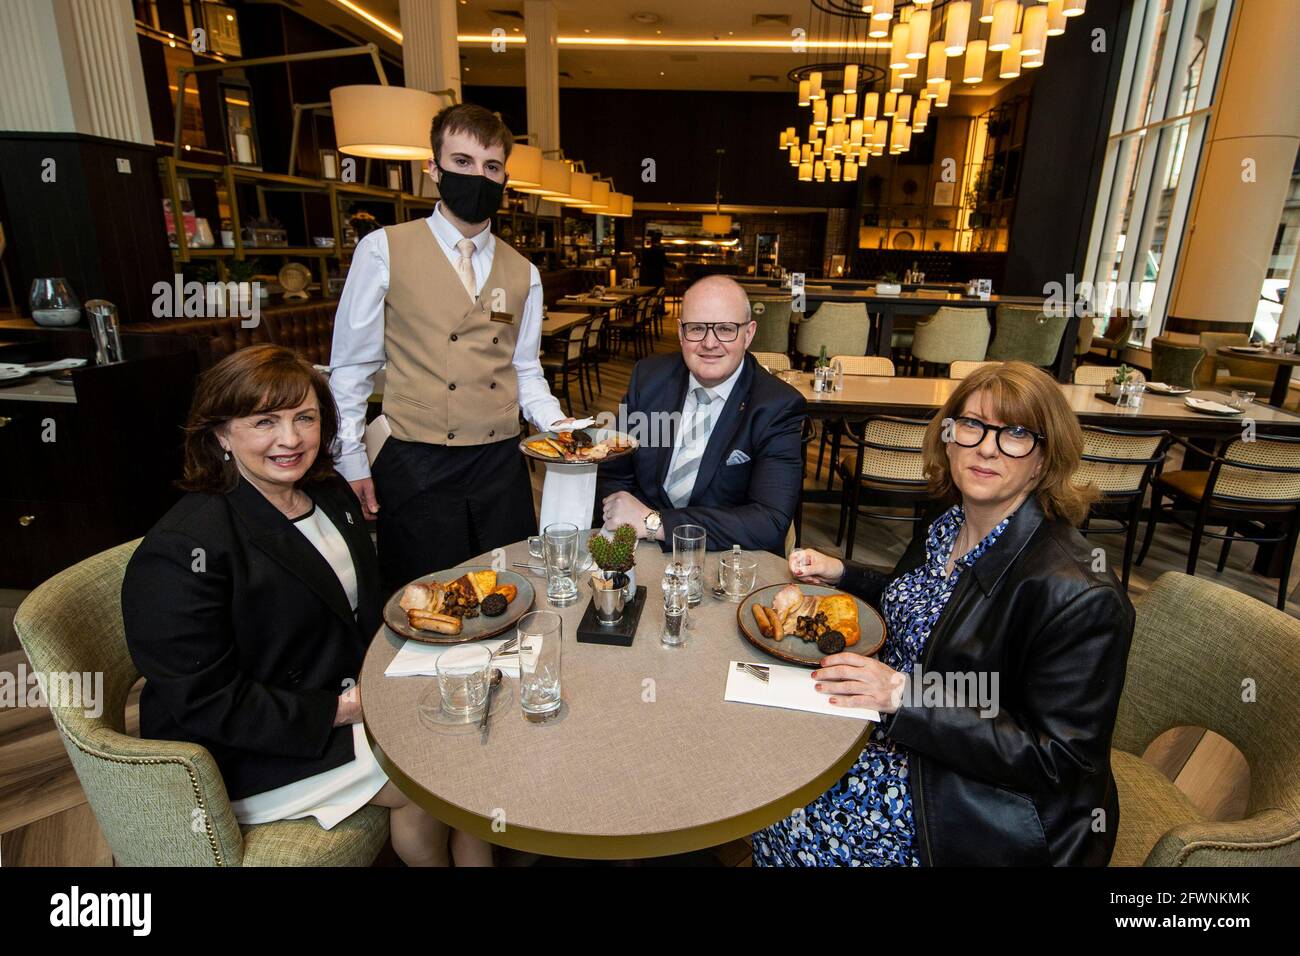 Northern Ireland Economy Minister Diane Dodds (left) welcomes the reopening of indoor hospitality at the Grand Central Hotel in Belfast with Janice Gault (right) of the Northern Ireland Hotels Federation (NIHF) and General Manager Stephen Meldrum (second from right) as they are being served the hotel's house breakfast by Conor Sullivan. Stock Photo